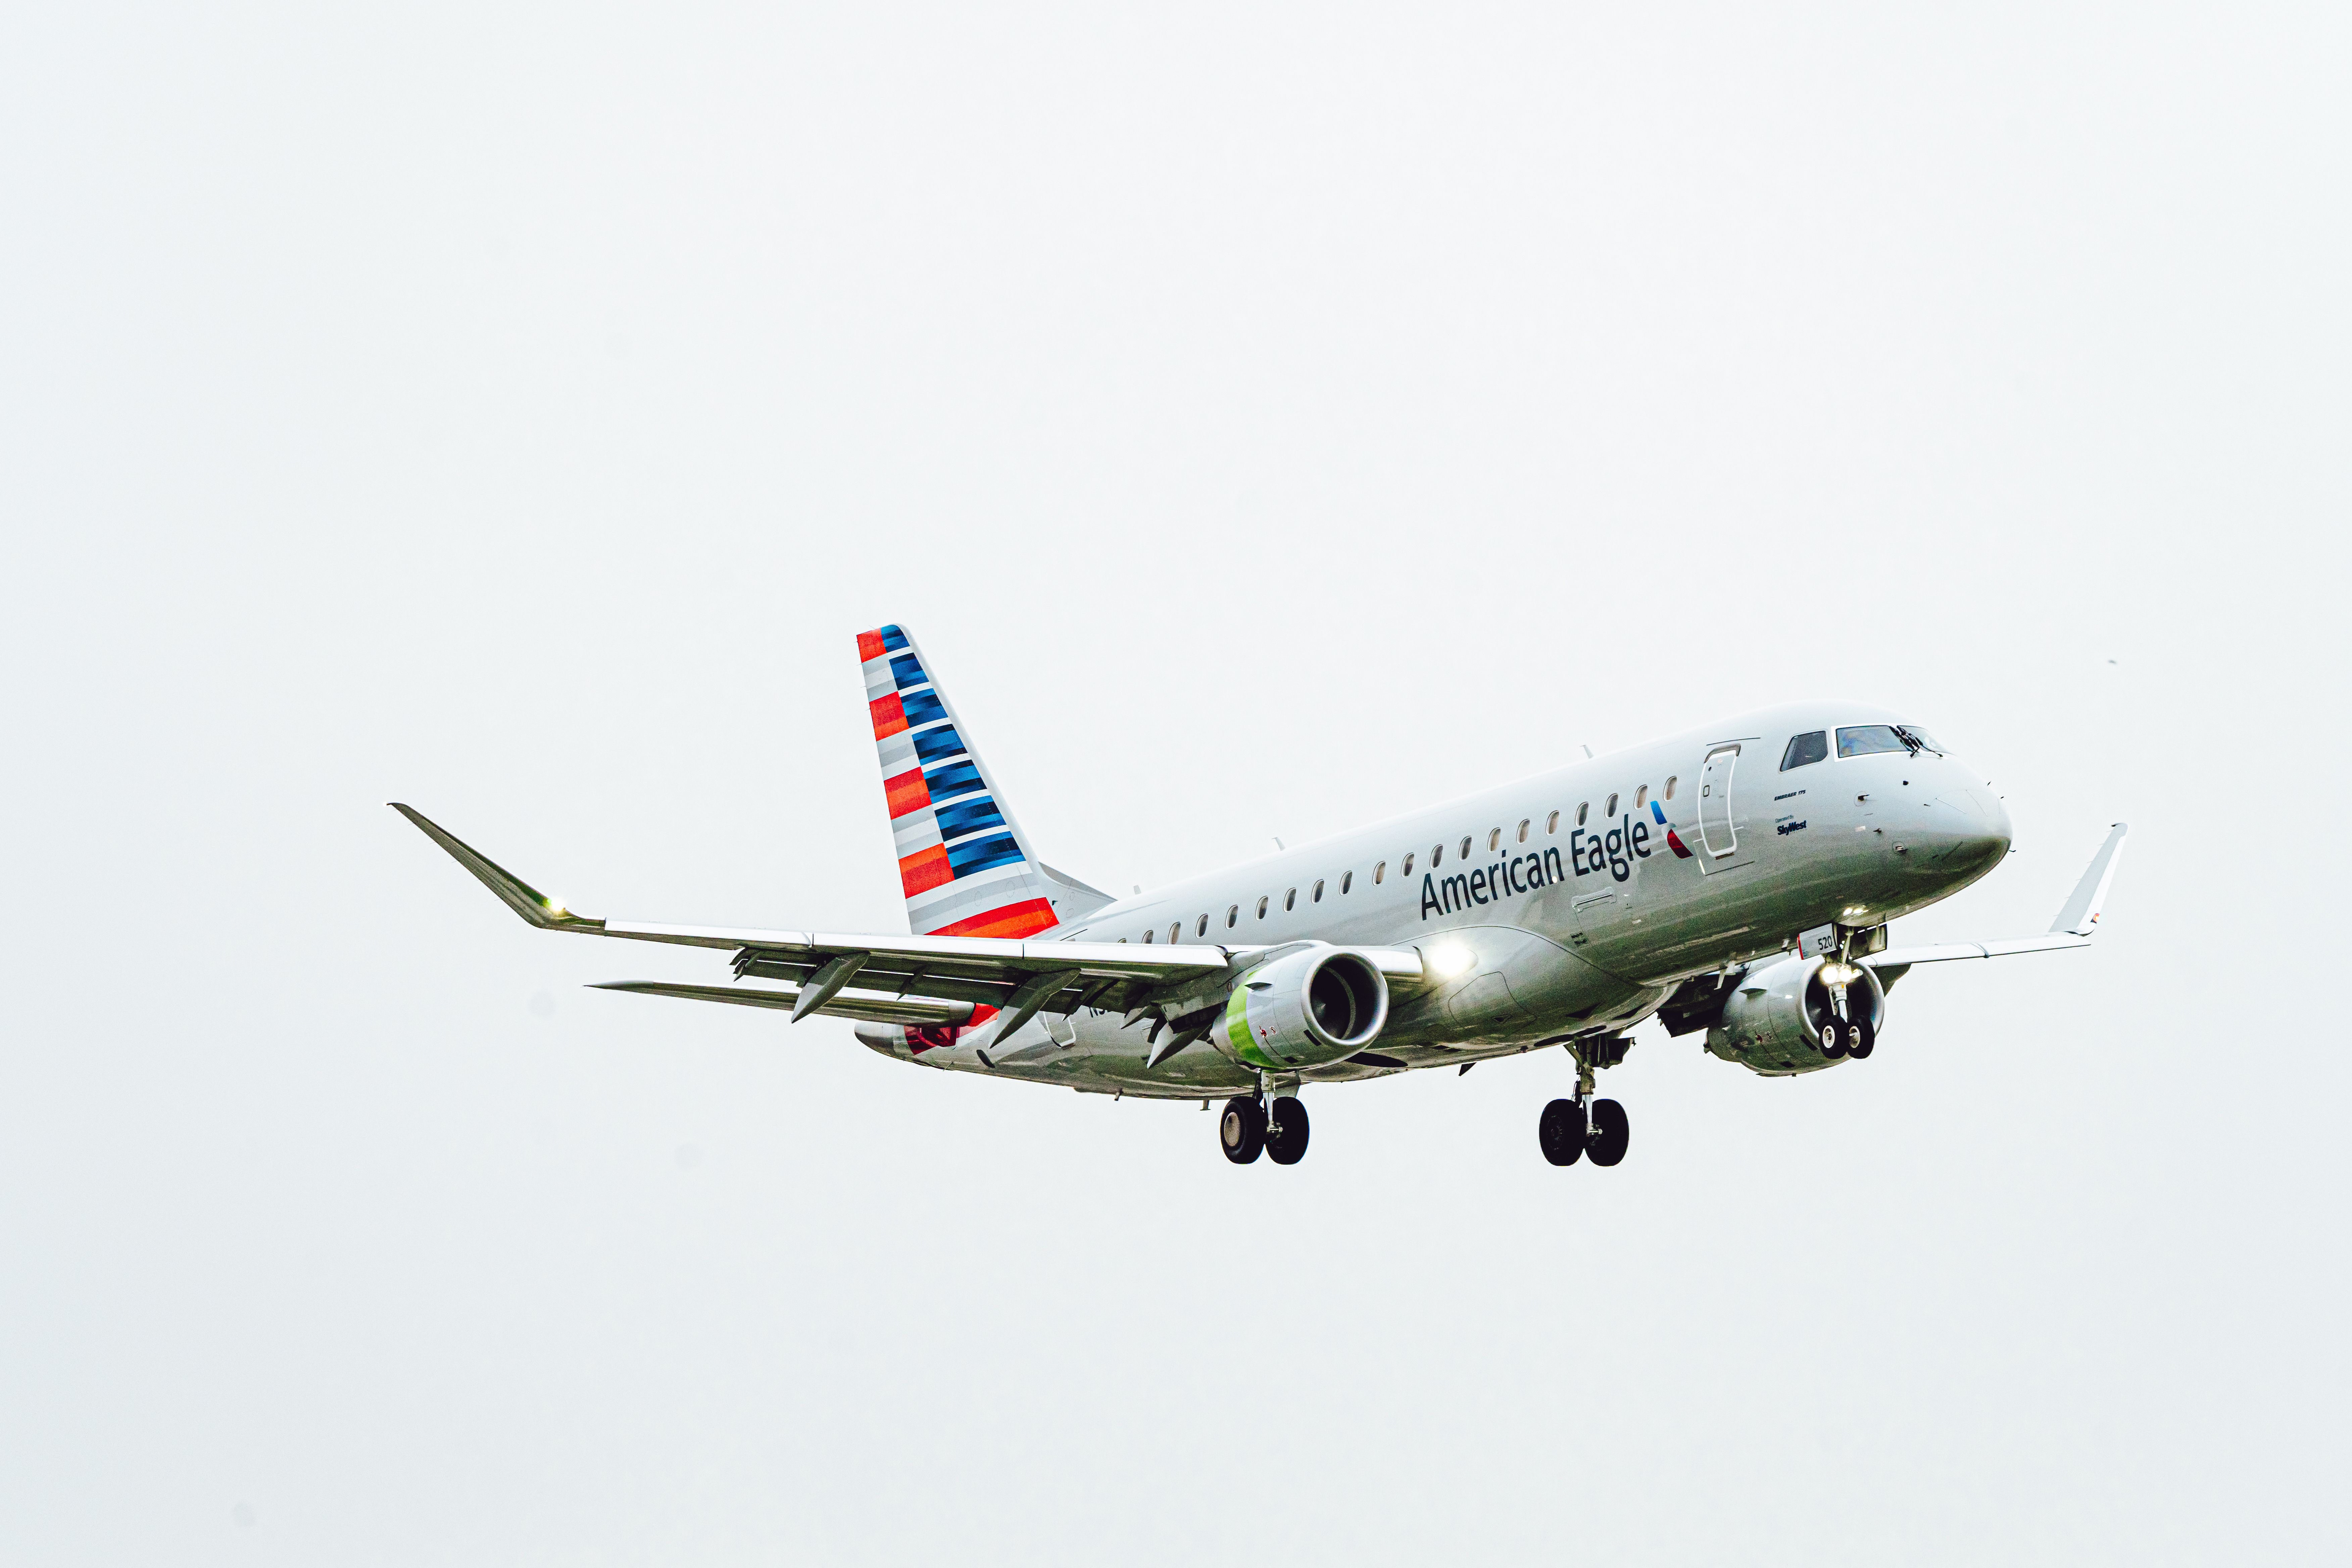 American Airlines Embraer E175 landing at LAX